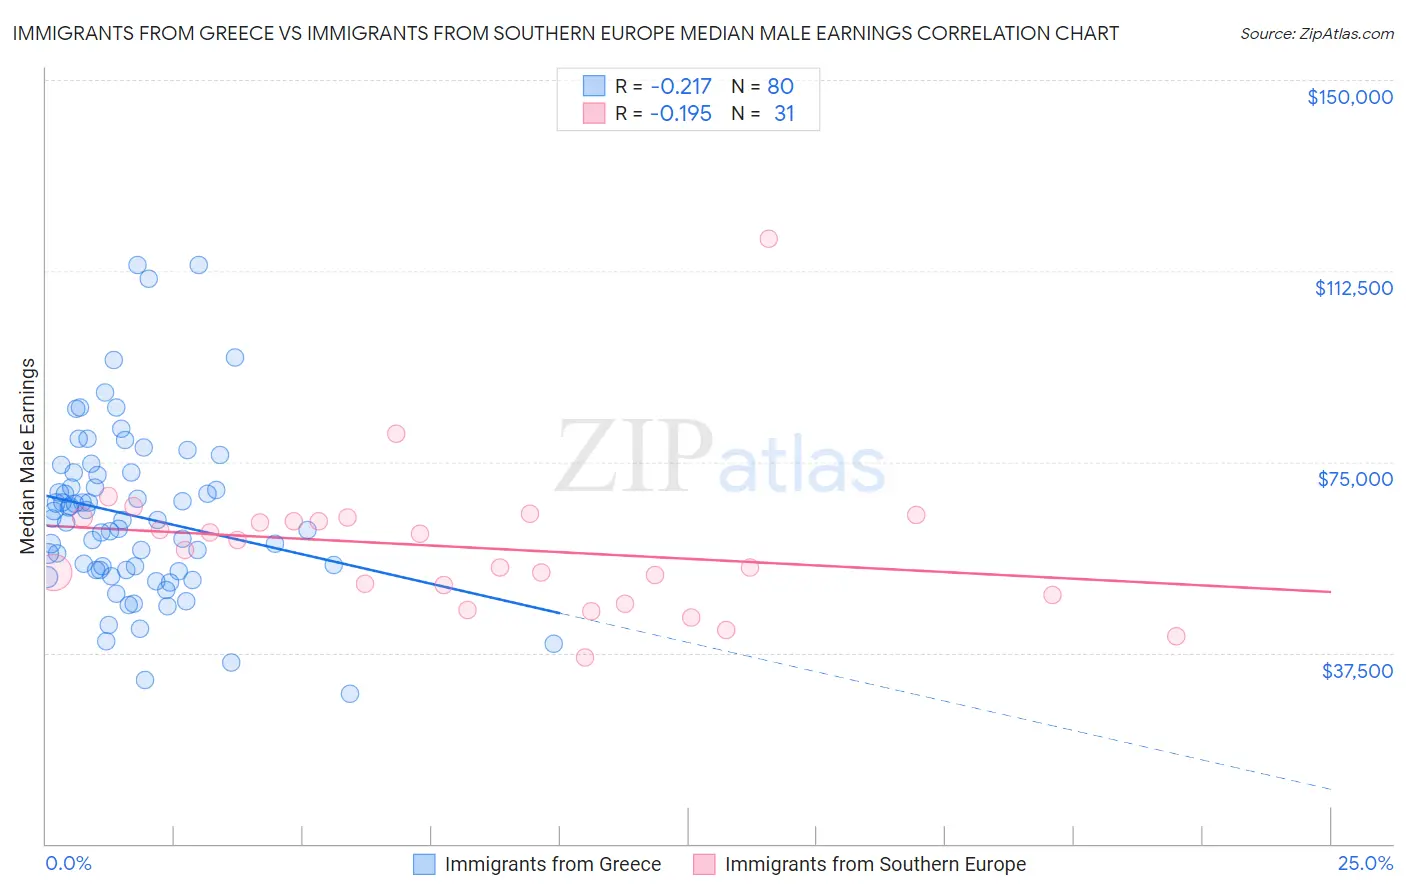 Immigrants from Greece vs Immigrants from Southern Europe Median Male Earnings